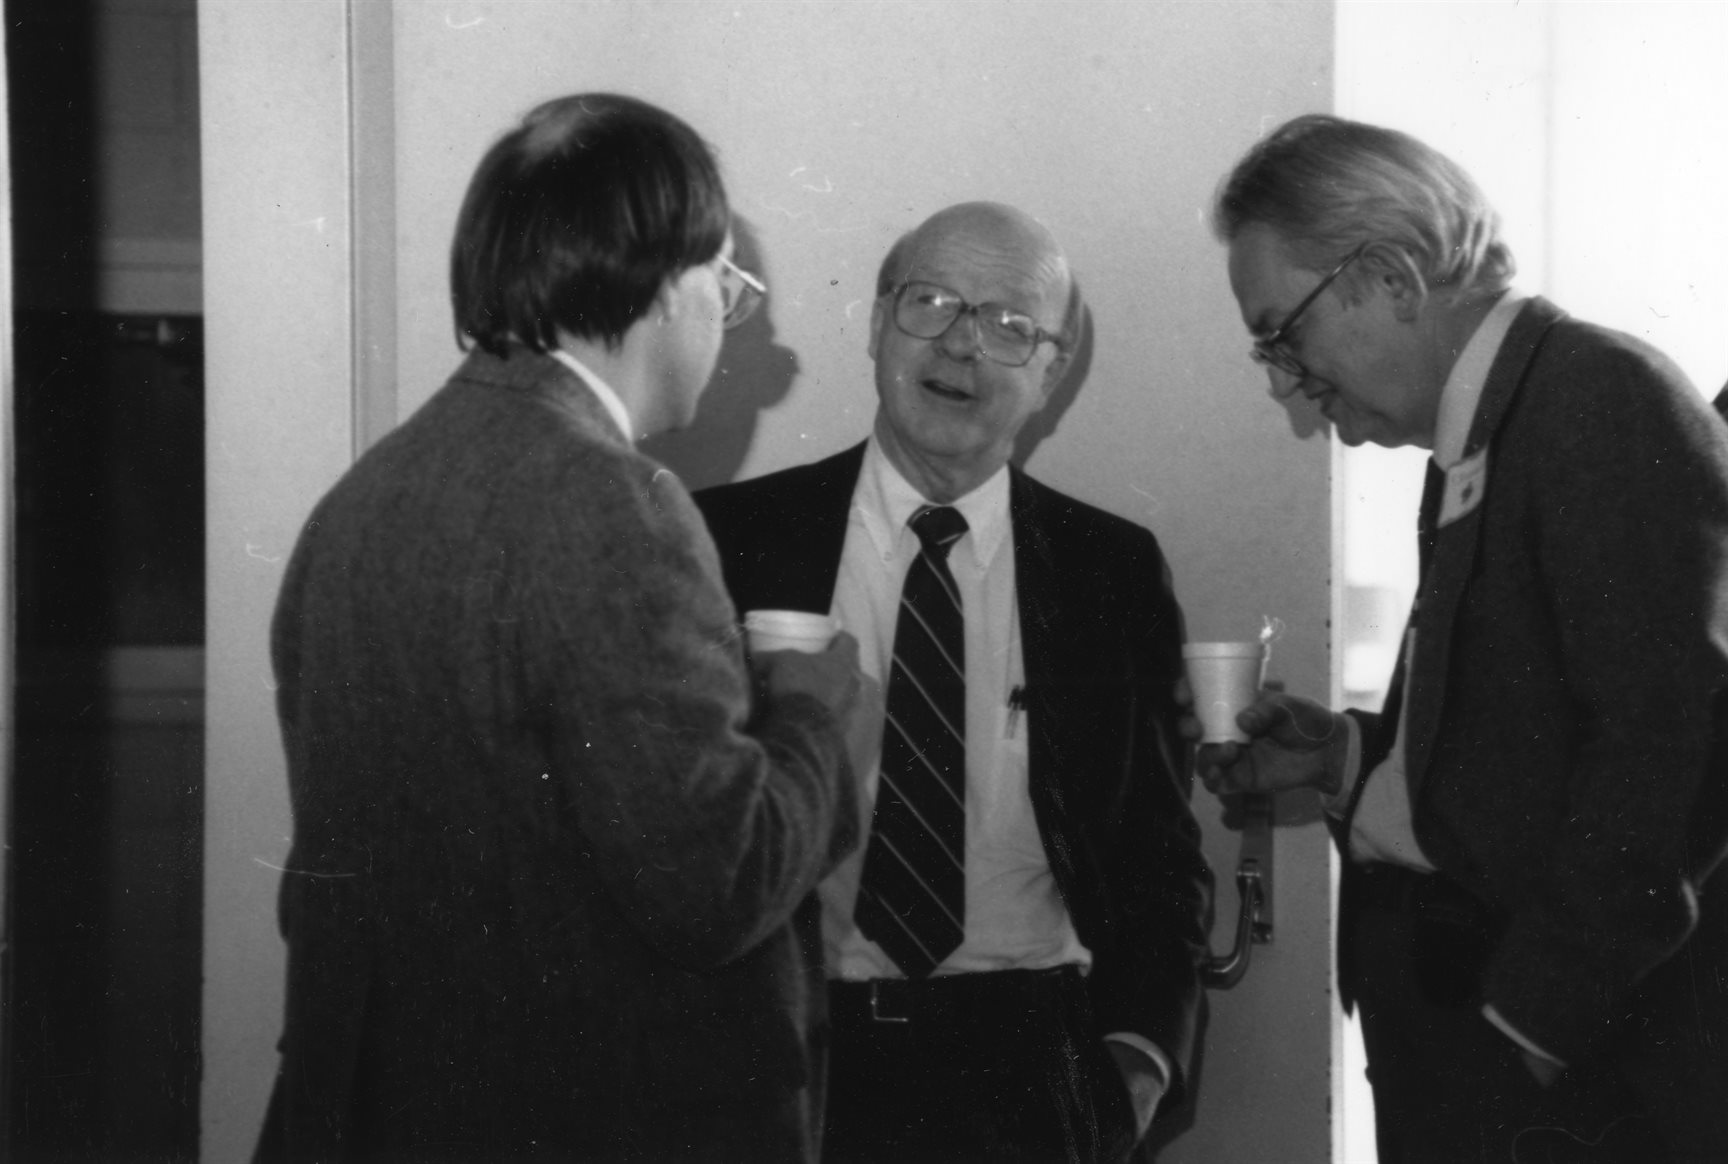 Unknown, David McCall and Charles Slichter converse, undated. Department of Physics, University of Illinois at Urbana-Champaign, courtesy of Emilio Segr&egrave; Visual Archives of the American Institute of Physics